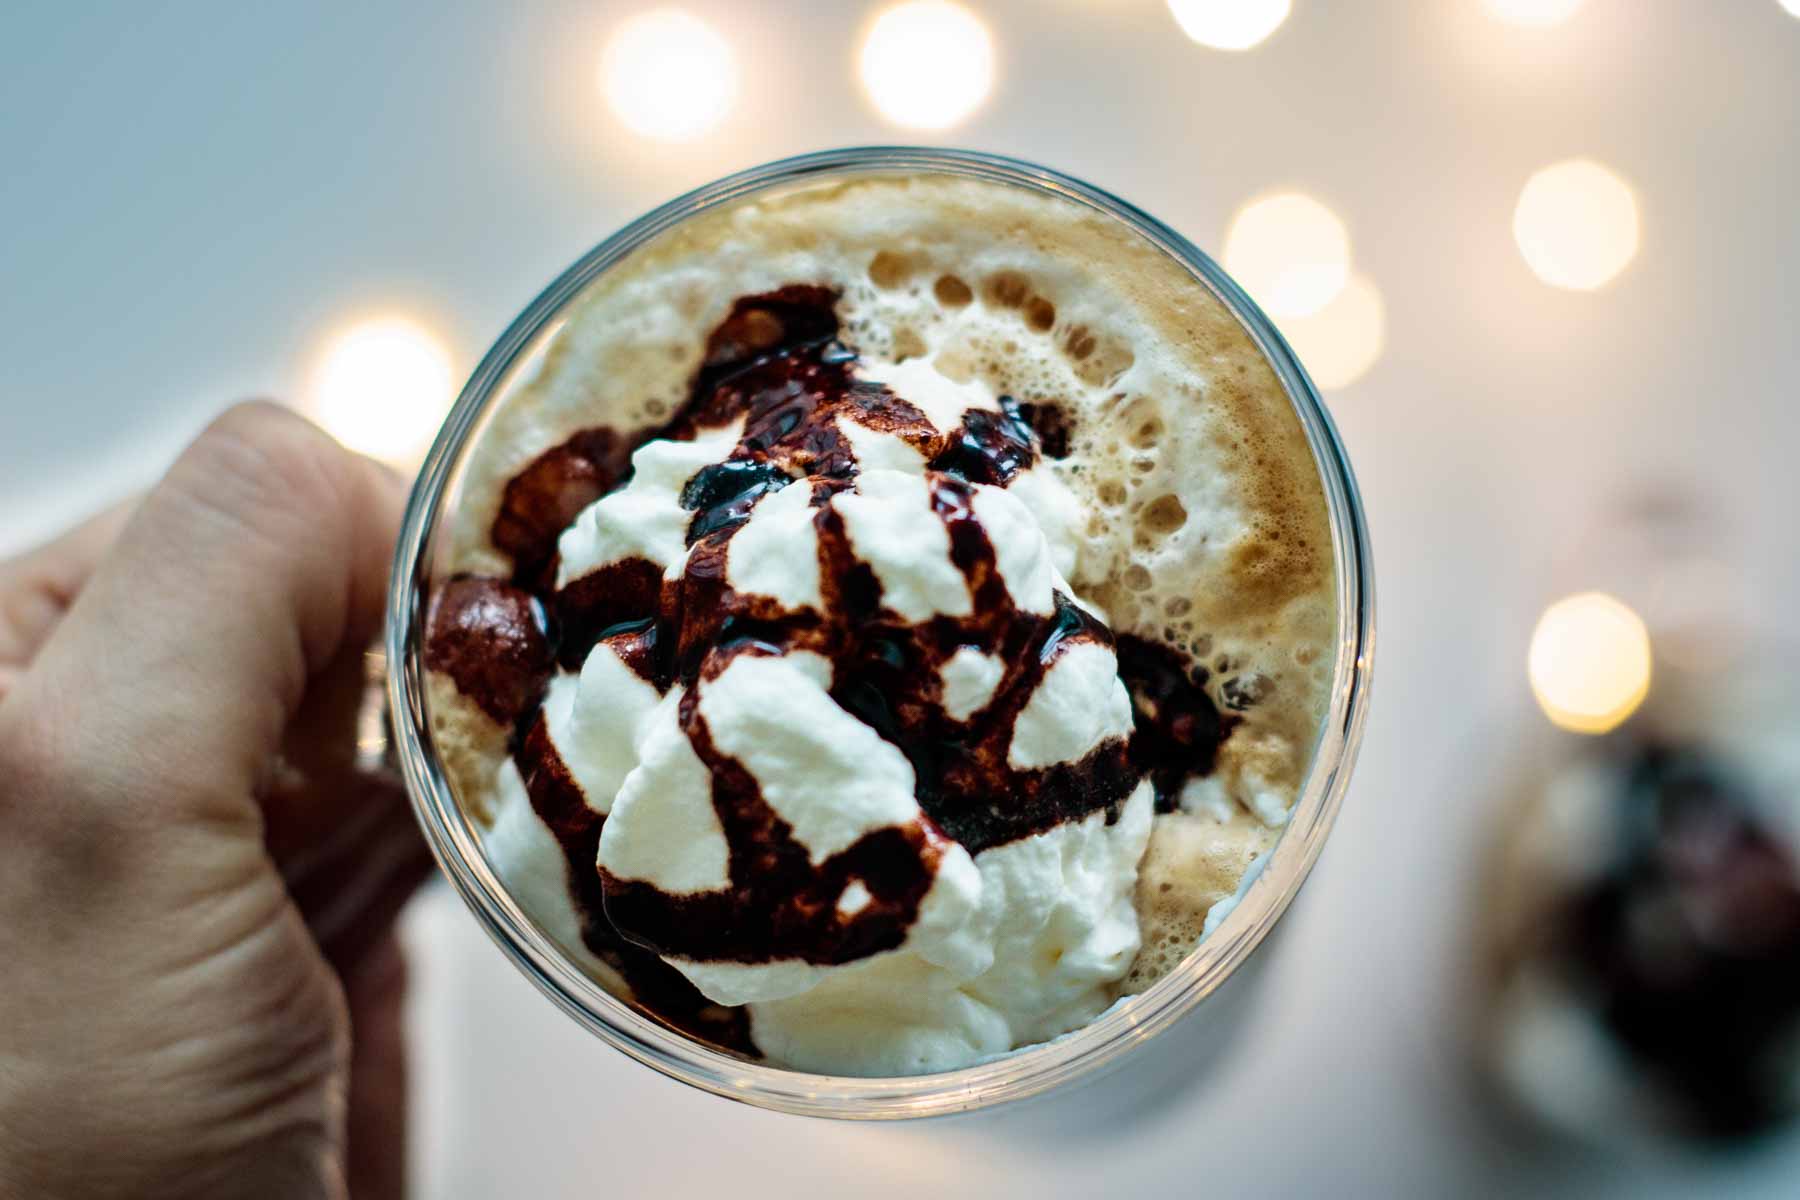 beverage in a glass cup seen from above, with mocha sauce and whipped cream on top